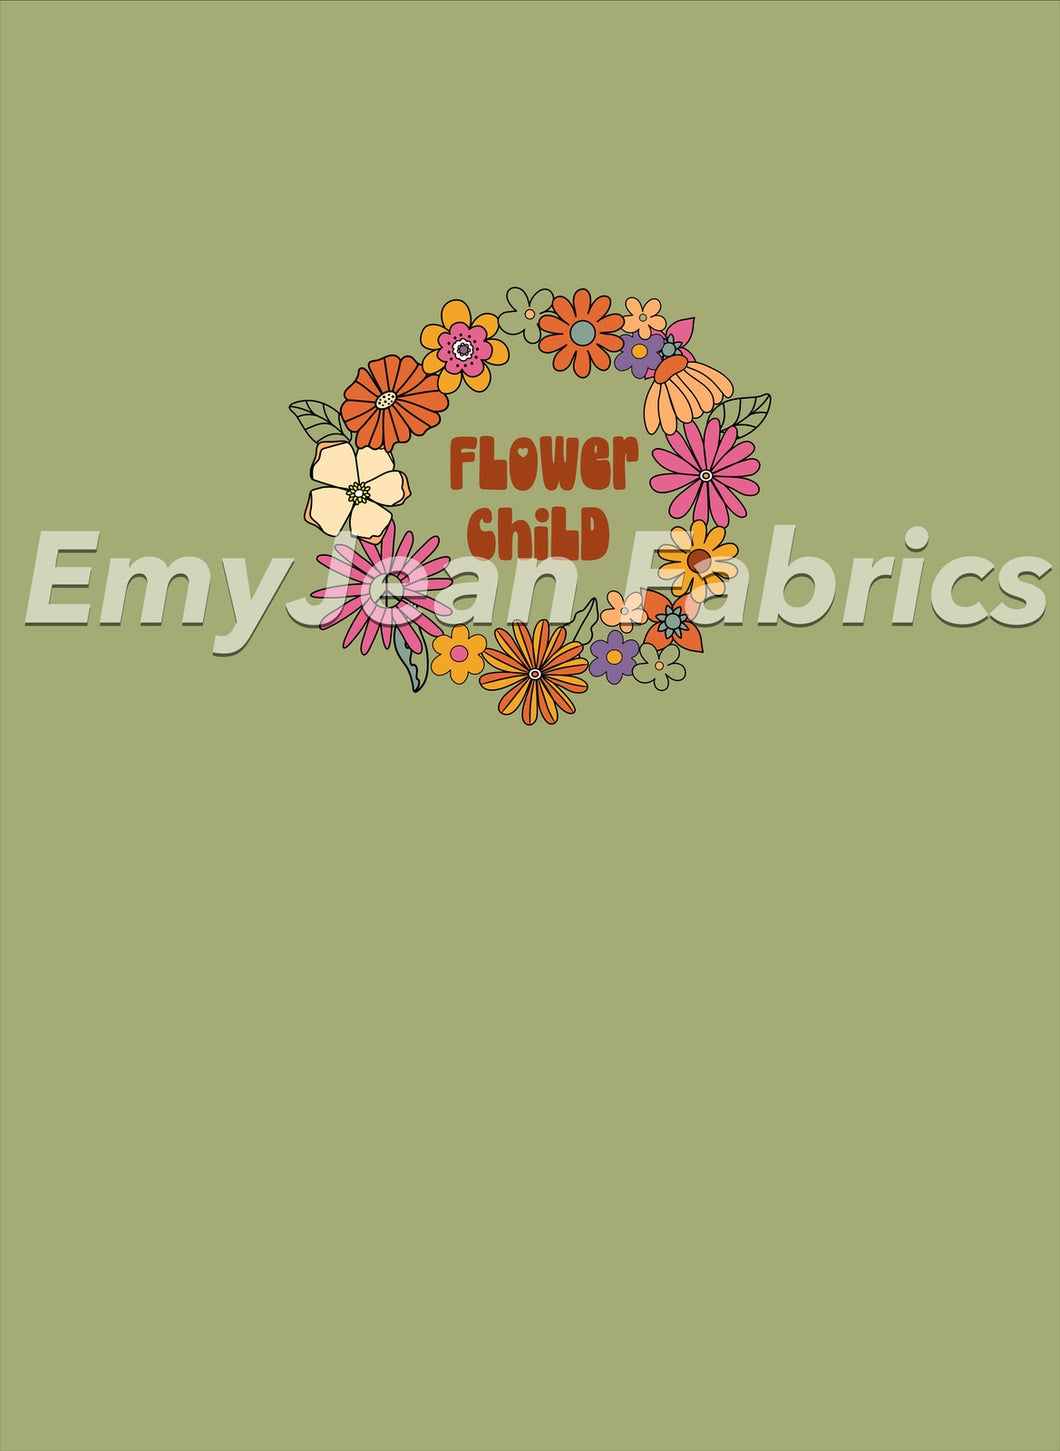 Flower Child Cotton Spandex, French Terry, Bamboo Spandex Panel